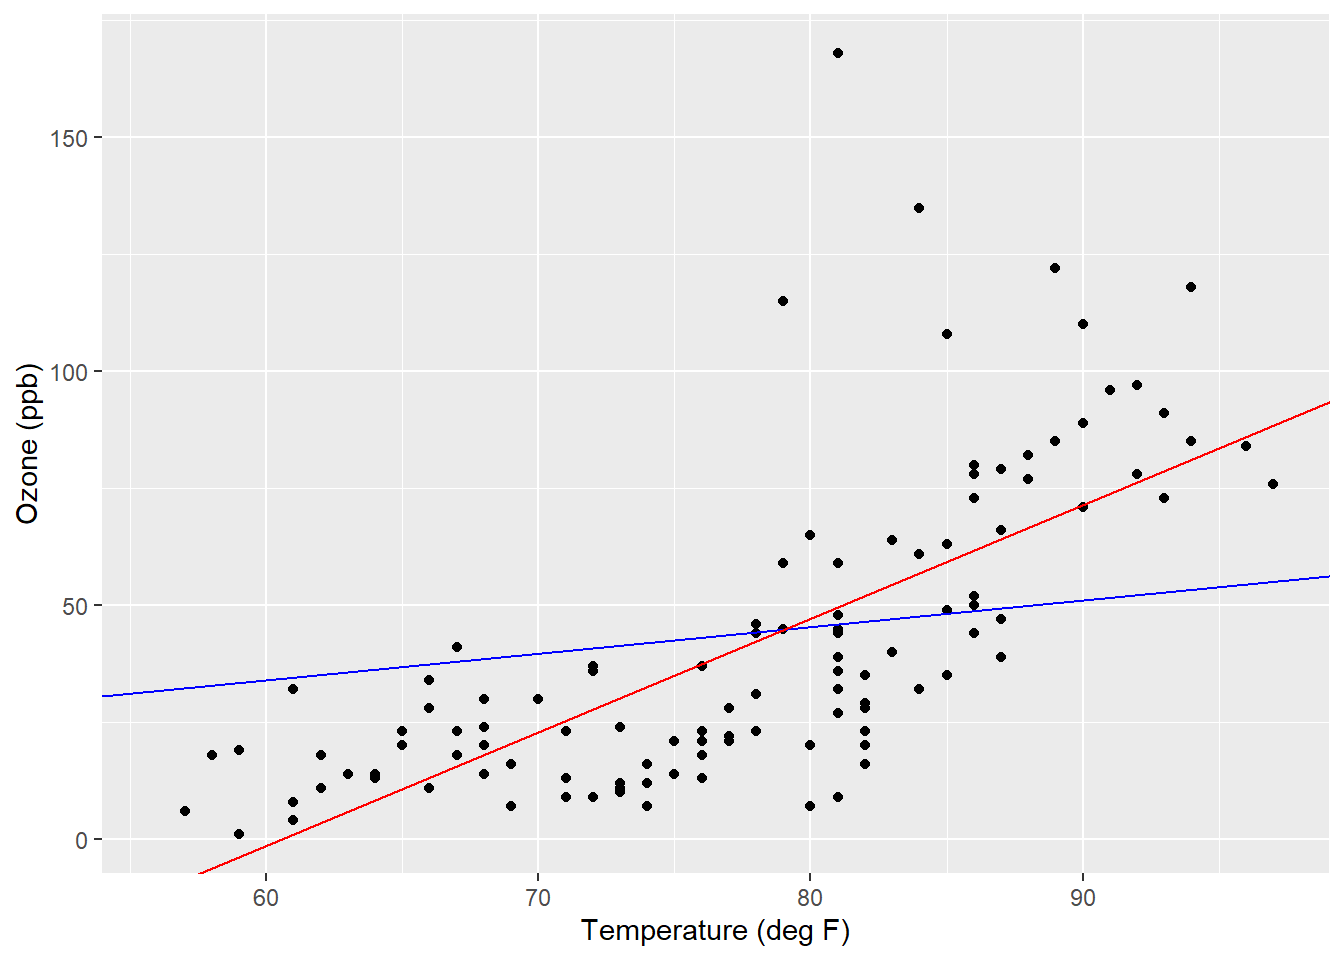 Regression lines for a simple proportions model (blue) and simple linear regression model (red) applied to the ozone data.